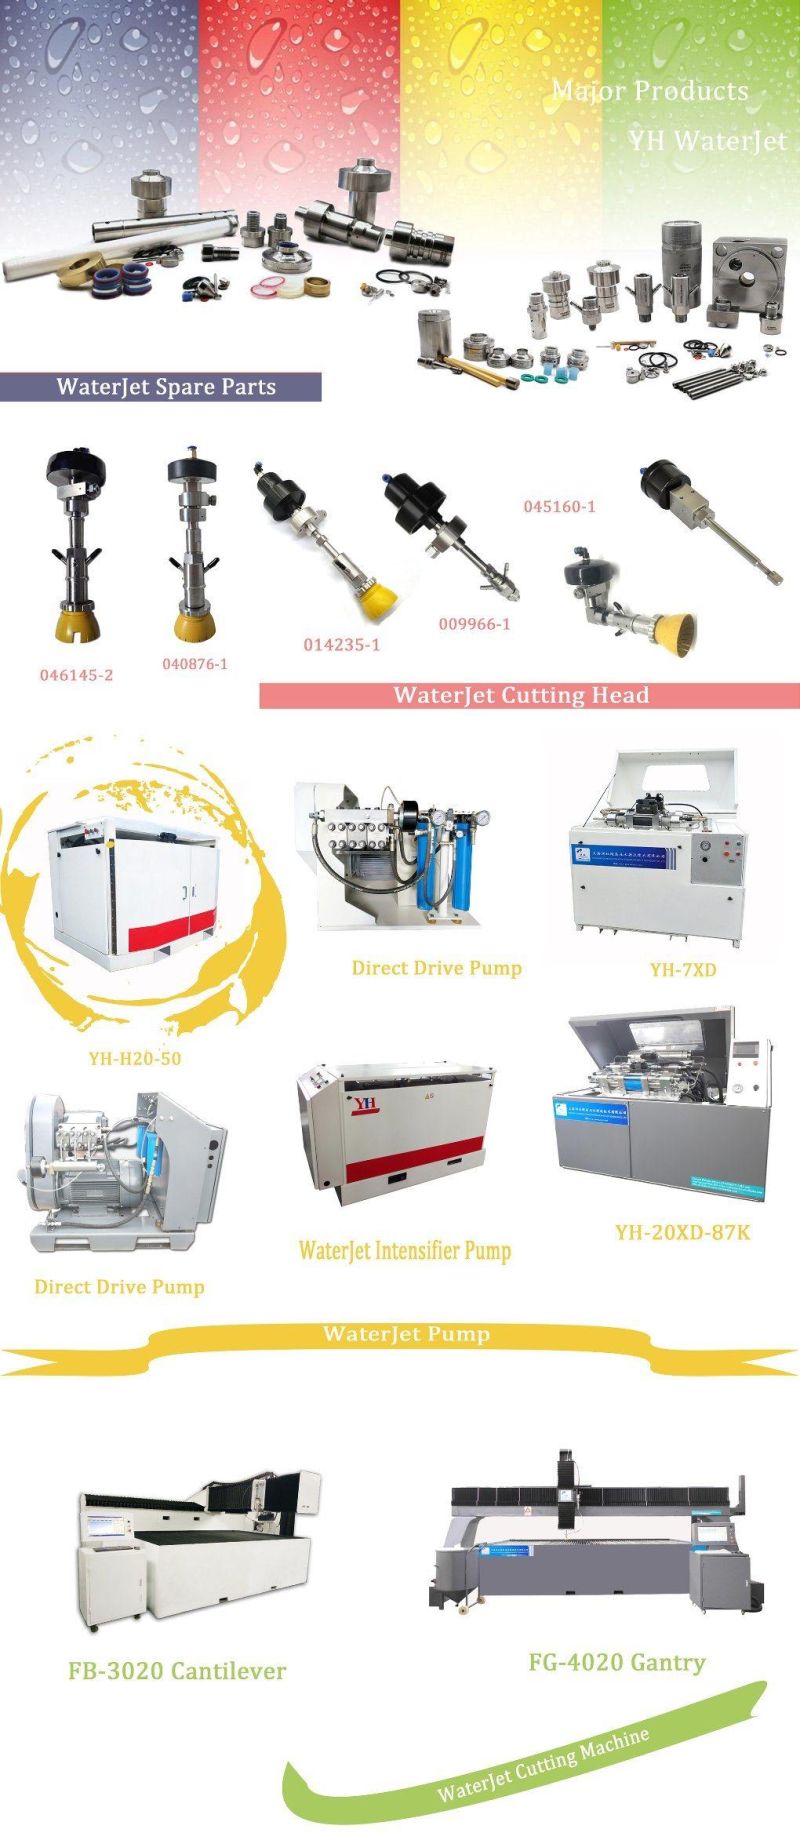 Waterjet Cutting Machine High Pressure Two Intensifiers Double Booster Pump